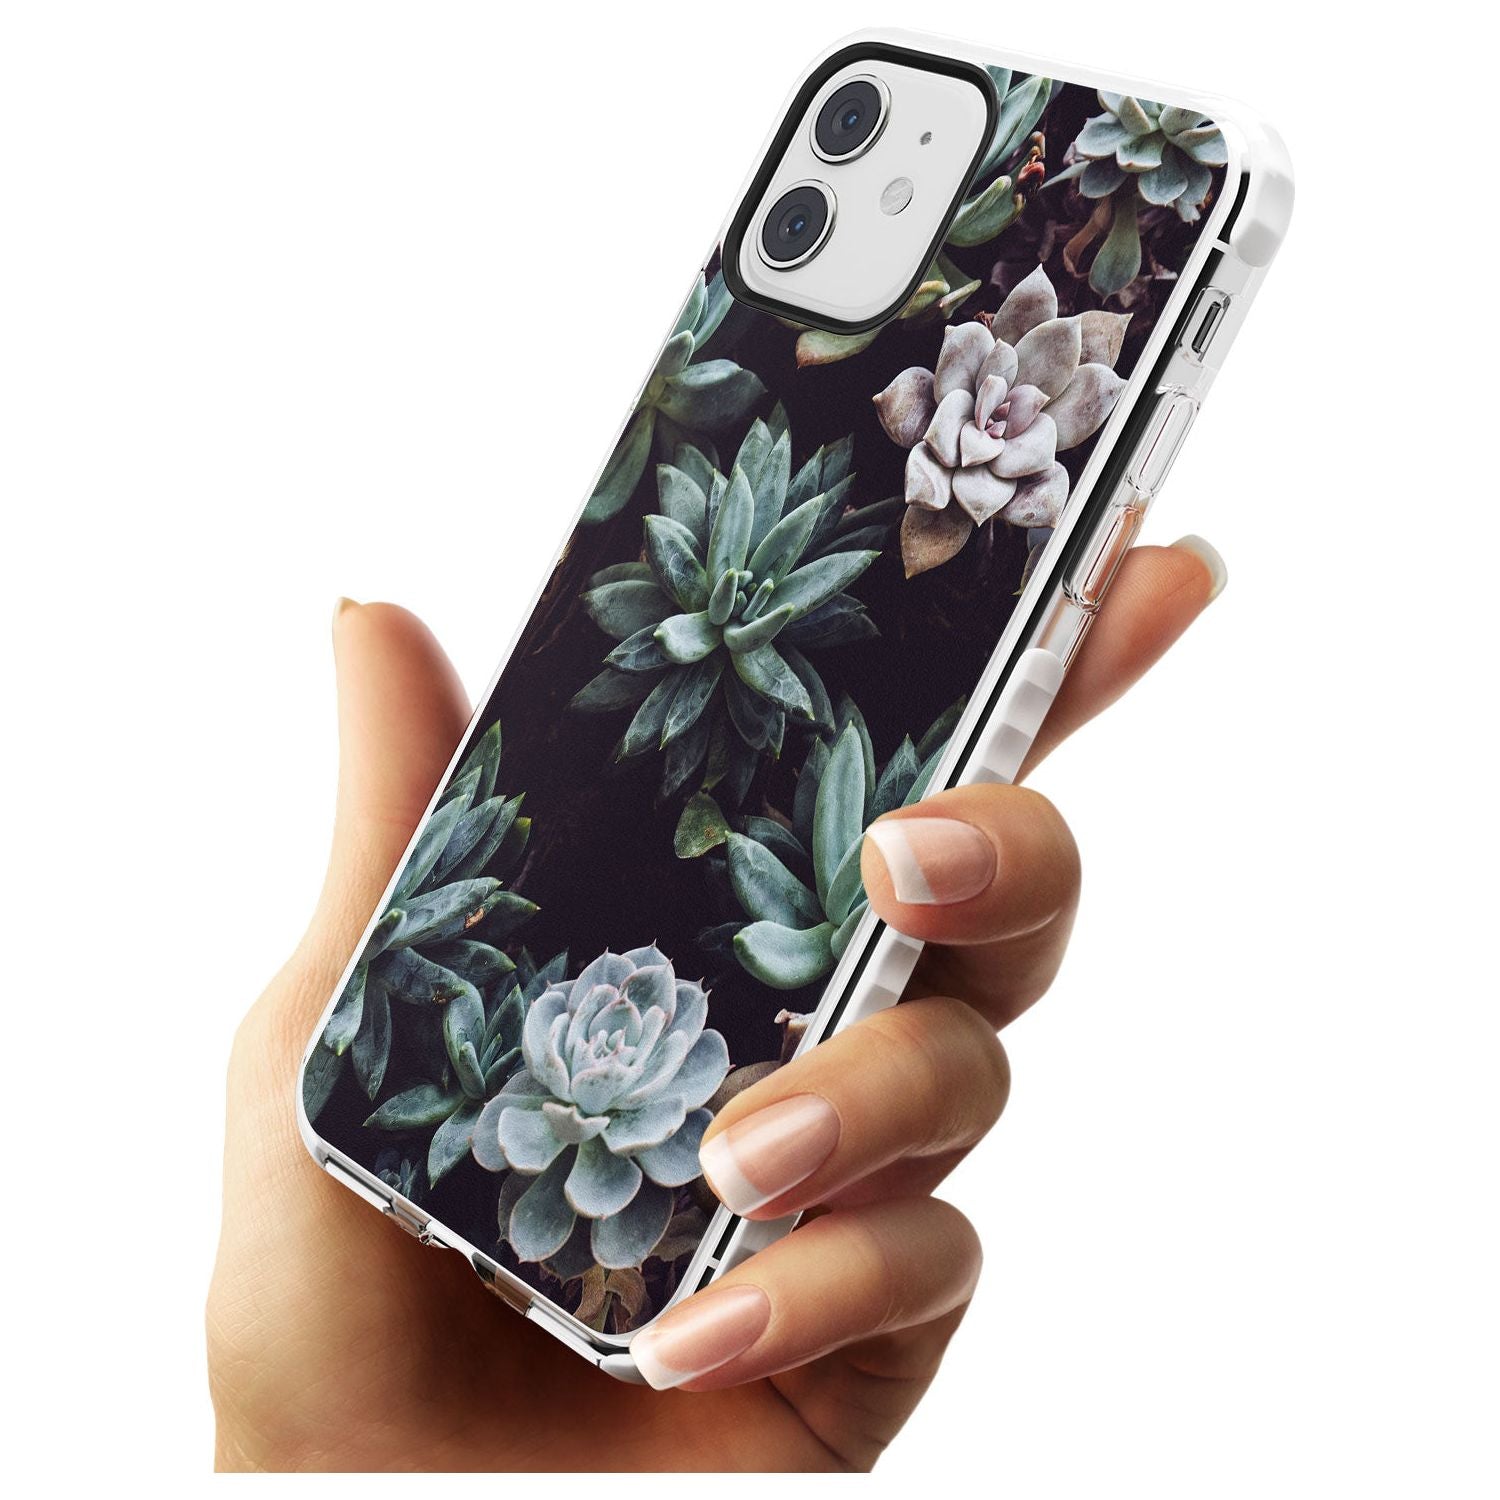 Mixed Succulents - Real Botanical Photographs Impact Phone Case for iPhone 11